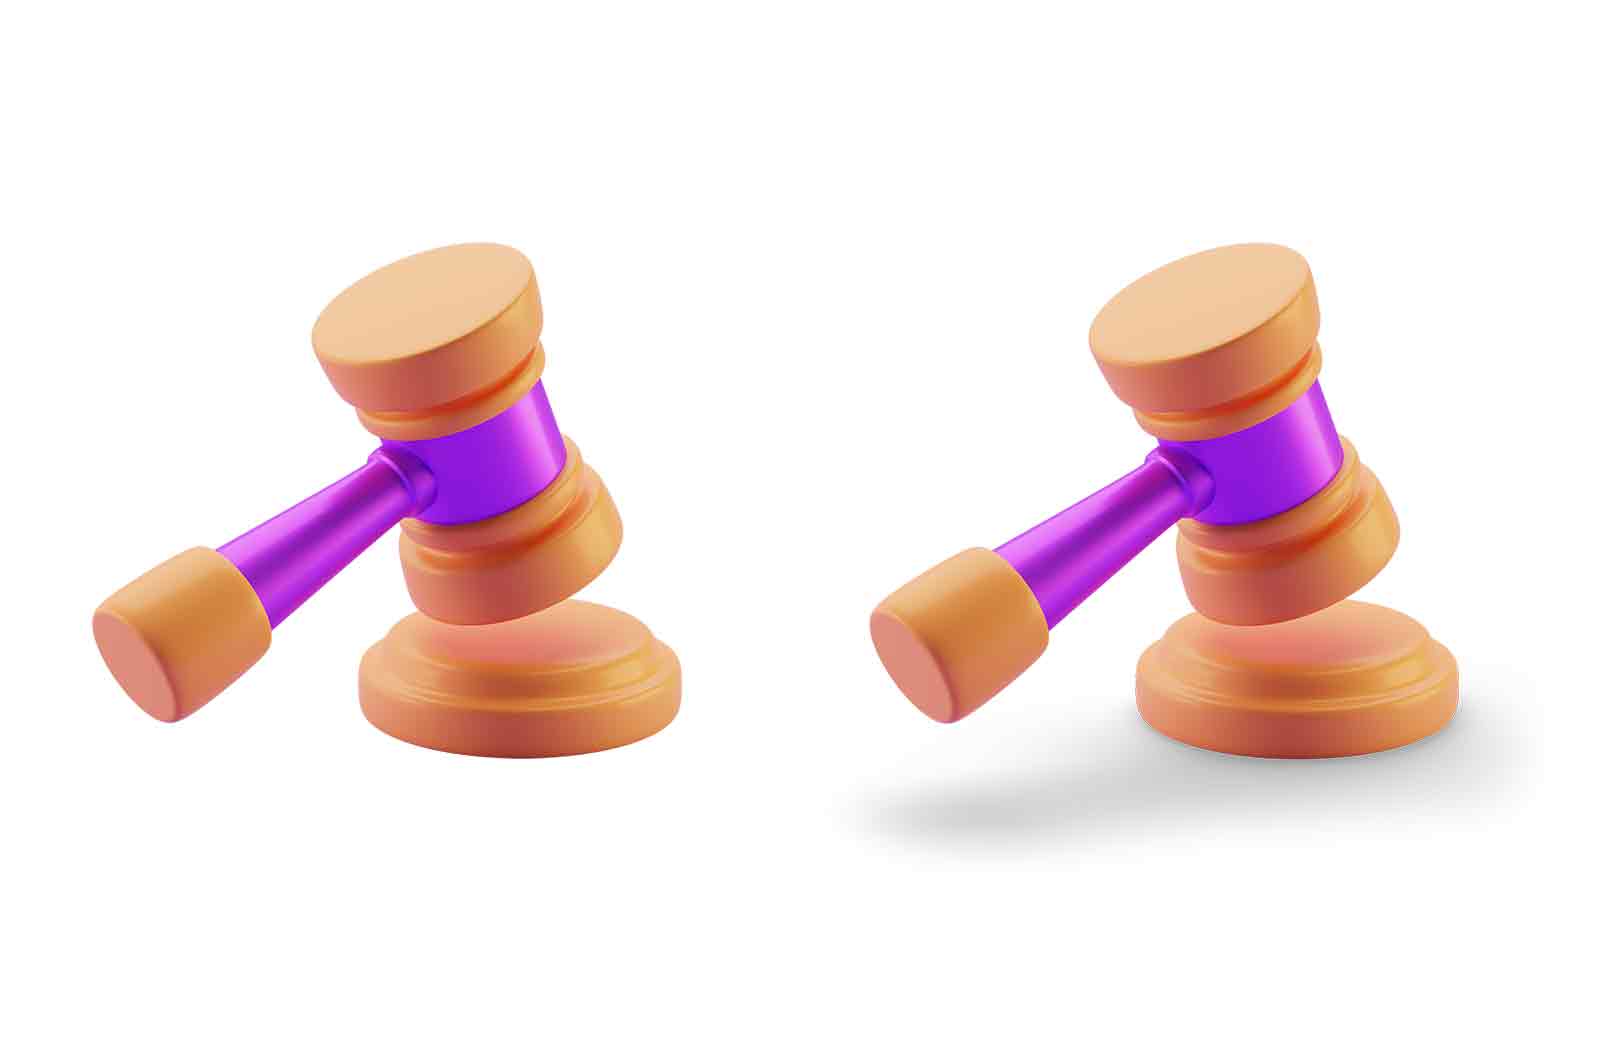 Auction hammer 3d rendered icon illustration. Gavel for auction sales or court hearing, symbol of legislation authority